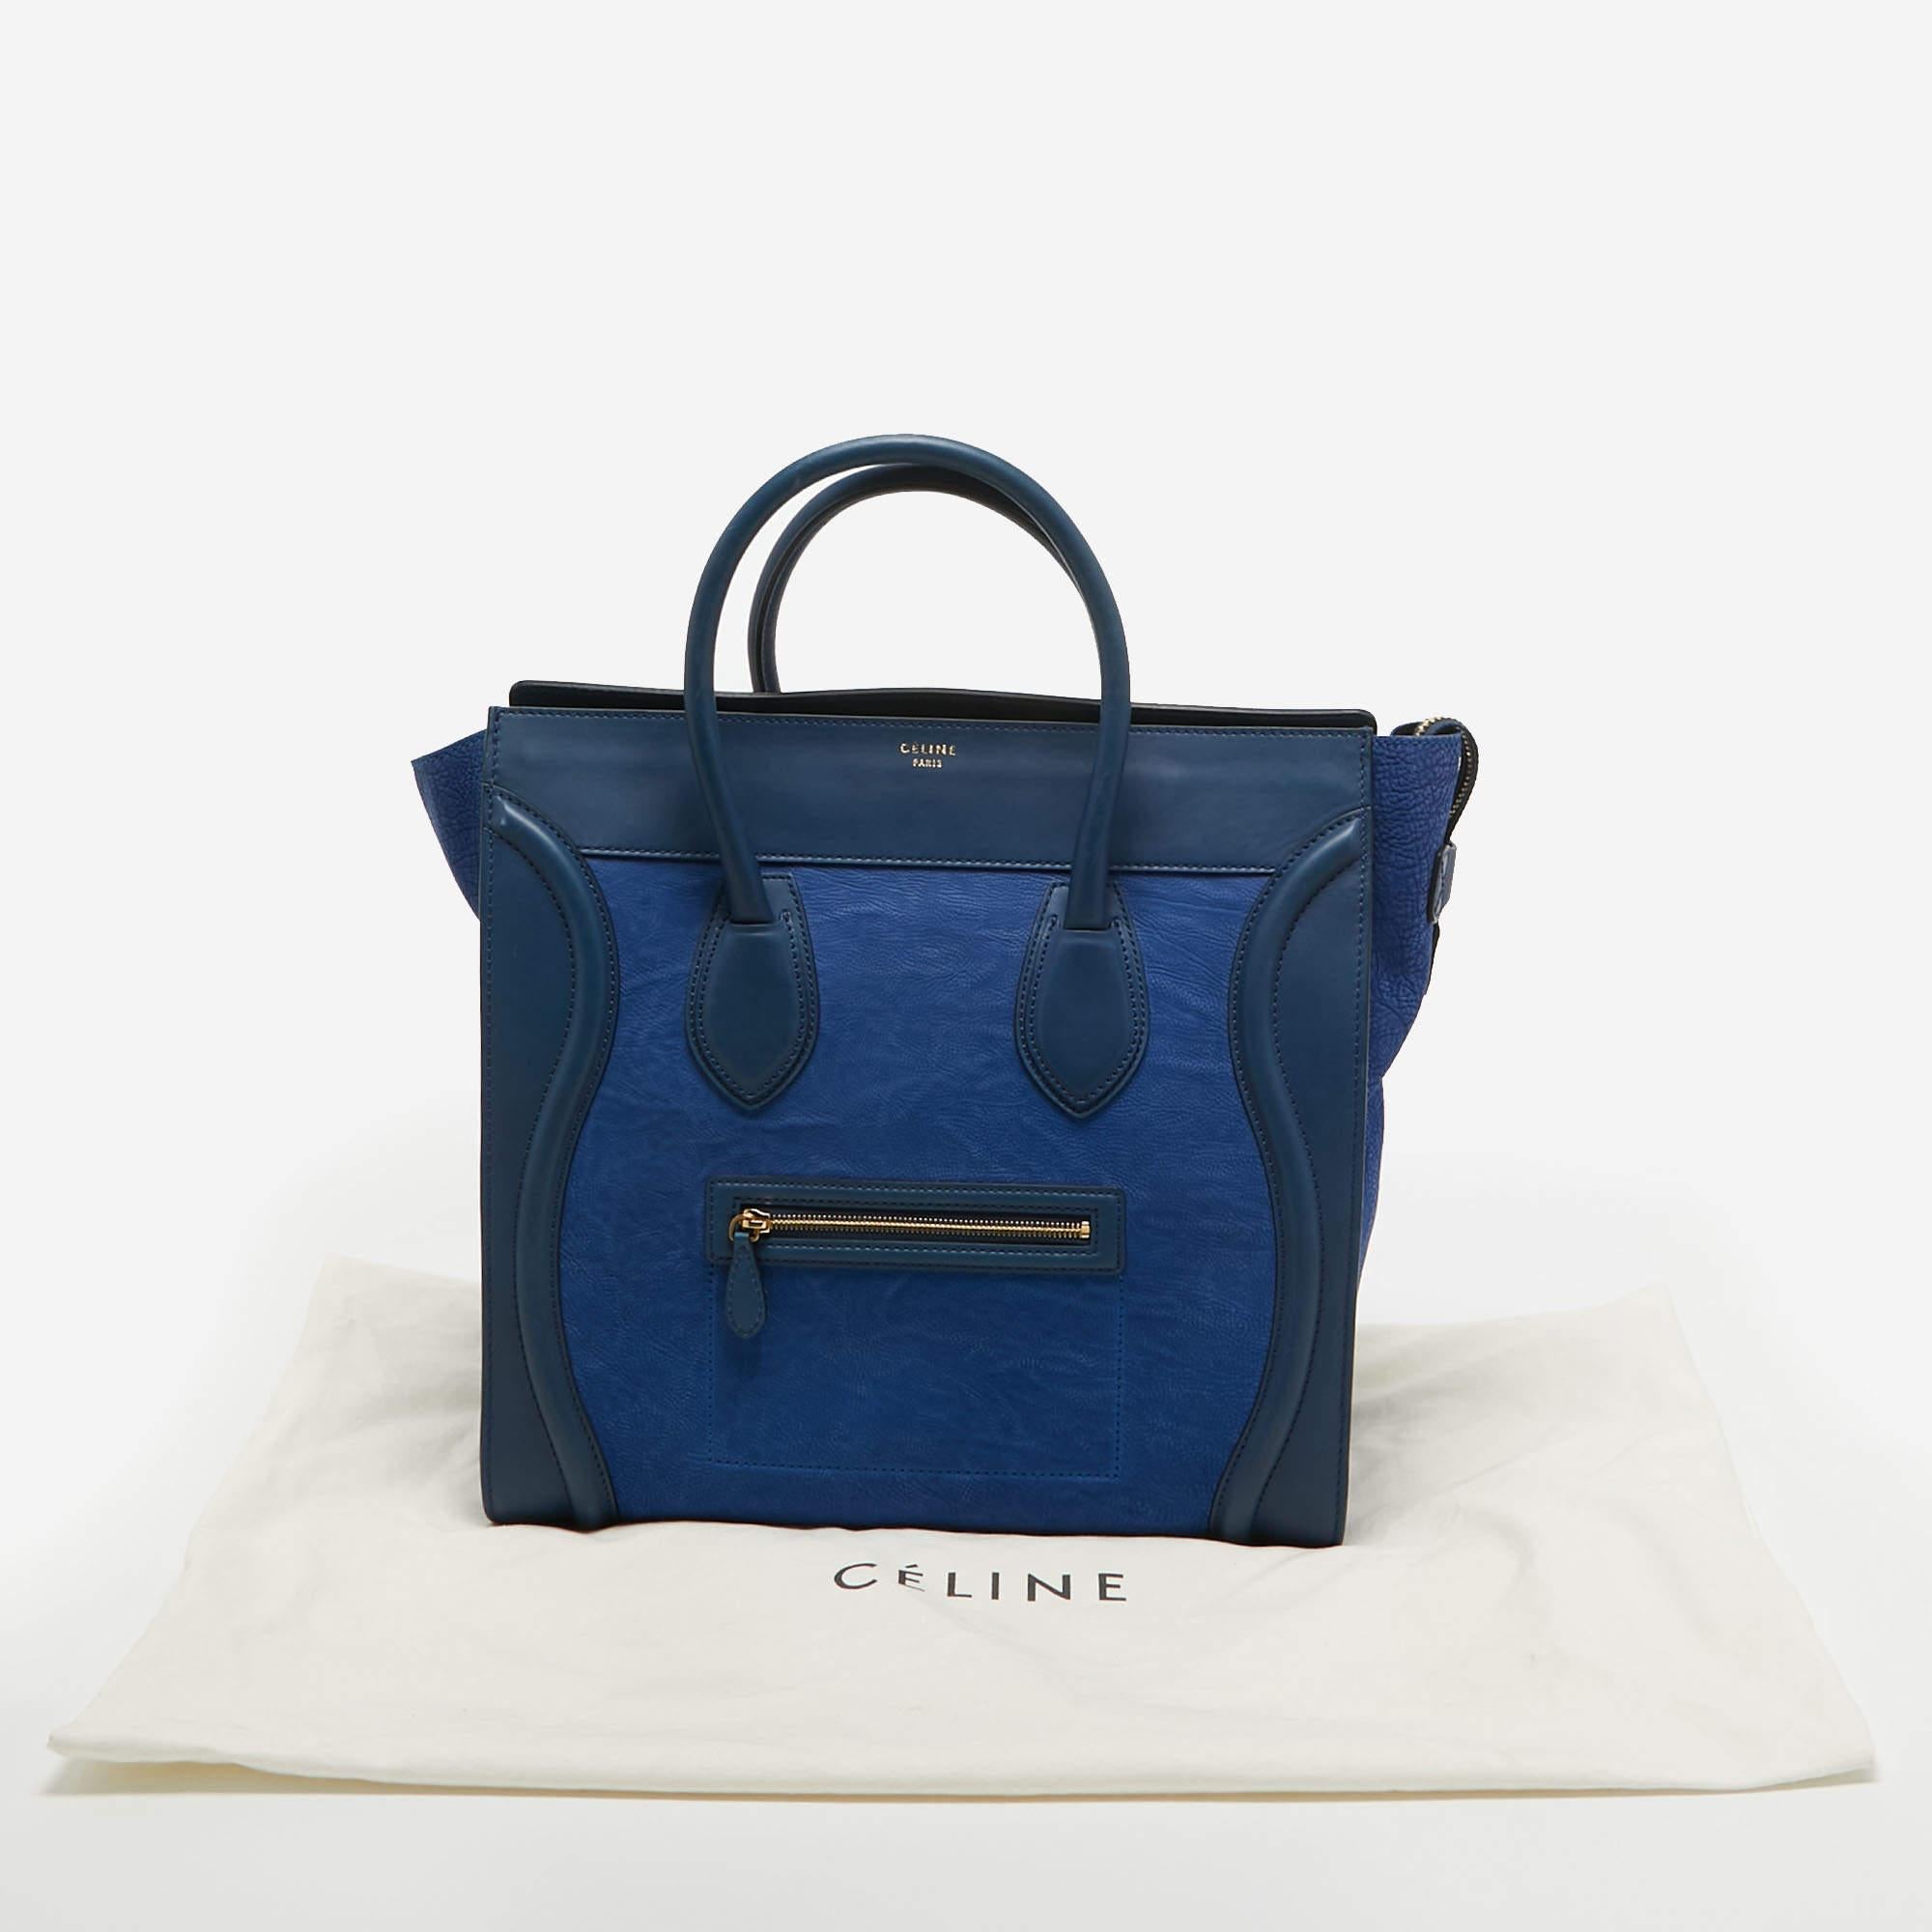 Celine Two Tone Blue Leather and Nubuck Medium Luggage Tote For Sale 11